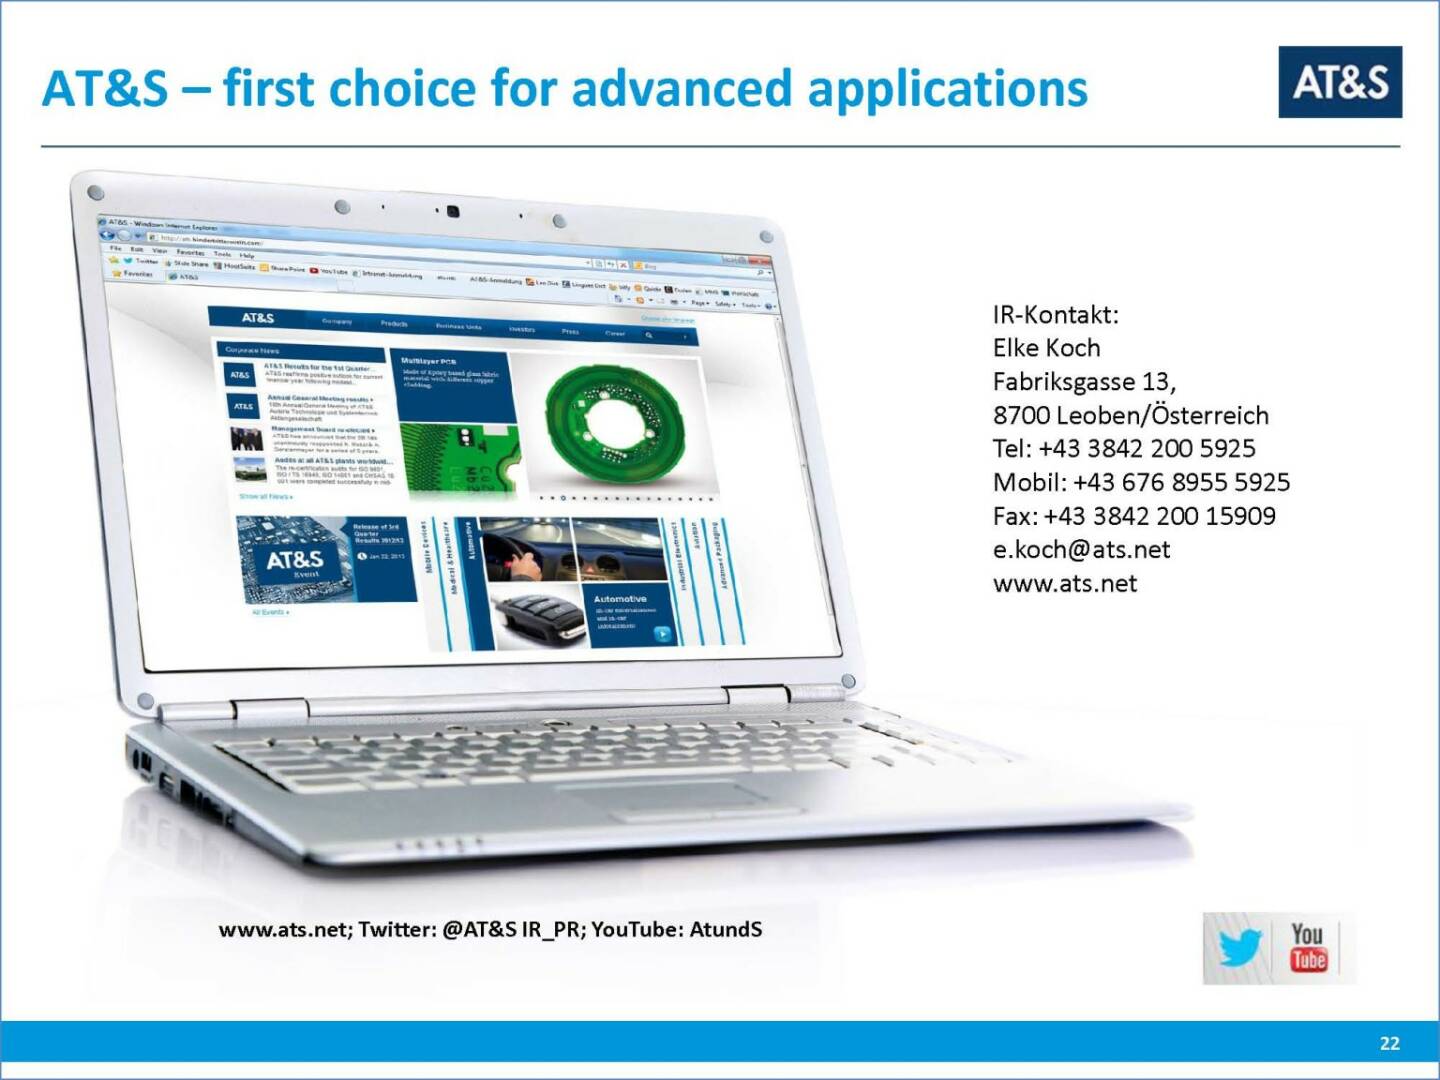 AT&S First choice for advanced applications